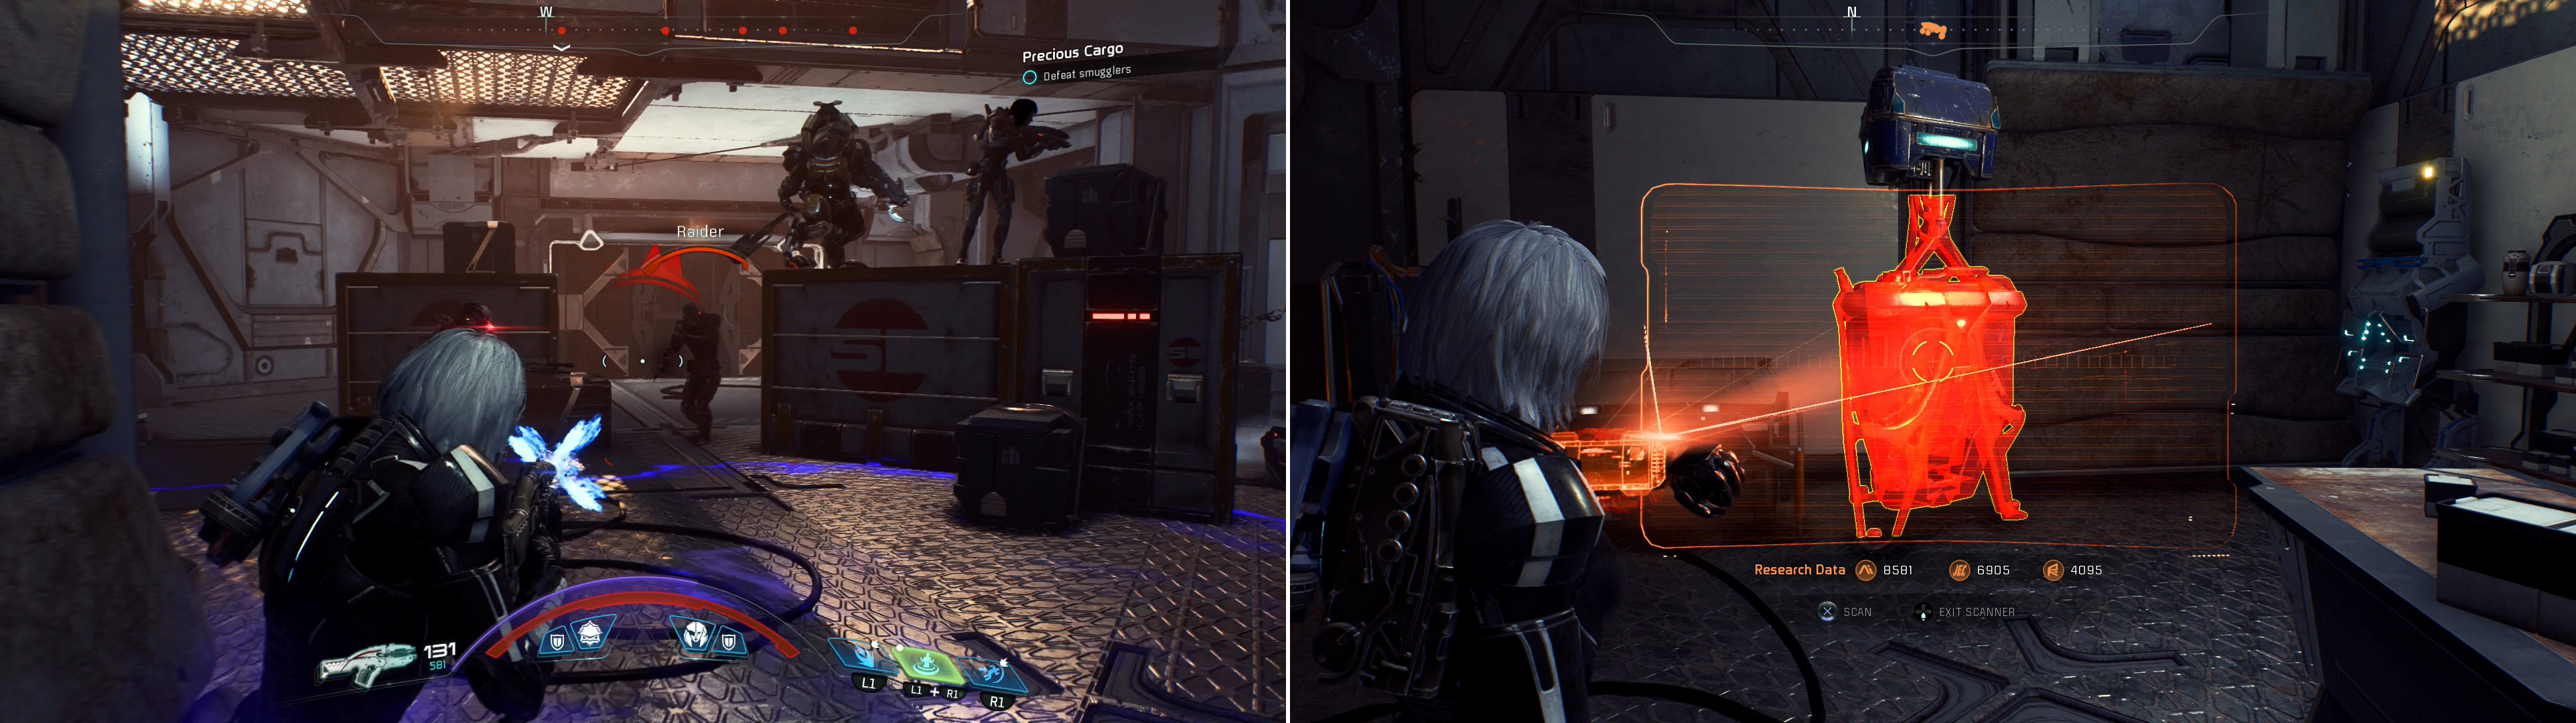 Defeat Zia and her fellow conspirators (left) and scan an Angaran Integrated Tech Node device while Reyes cleans up (right).